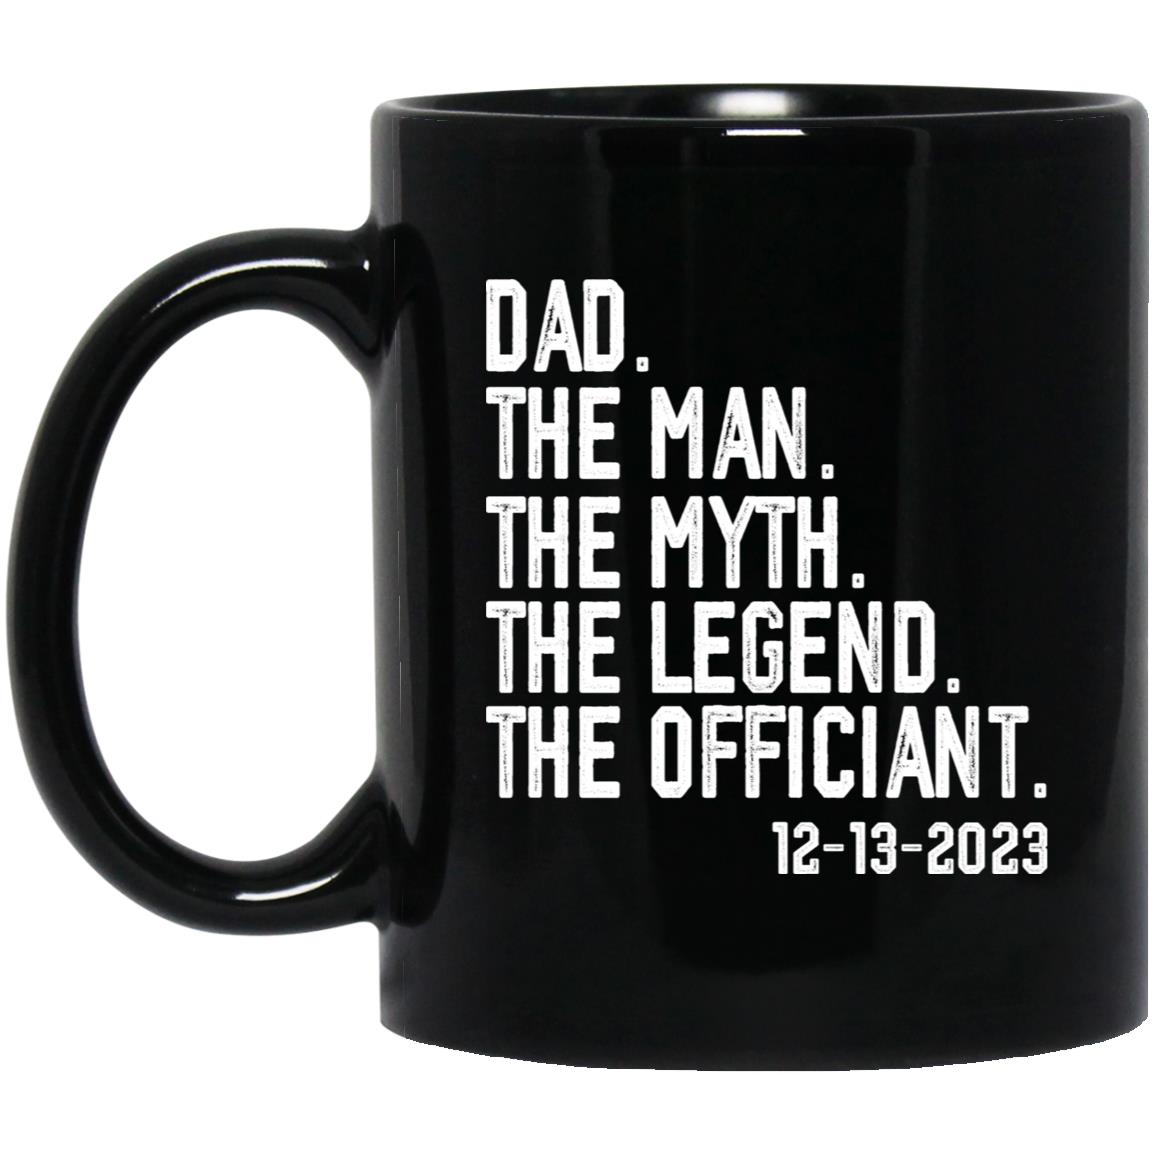 Personalized Gift Mug for Dad The Officiant The Man Myth Legend